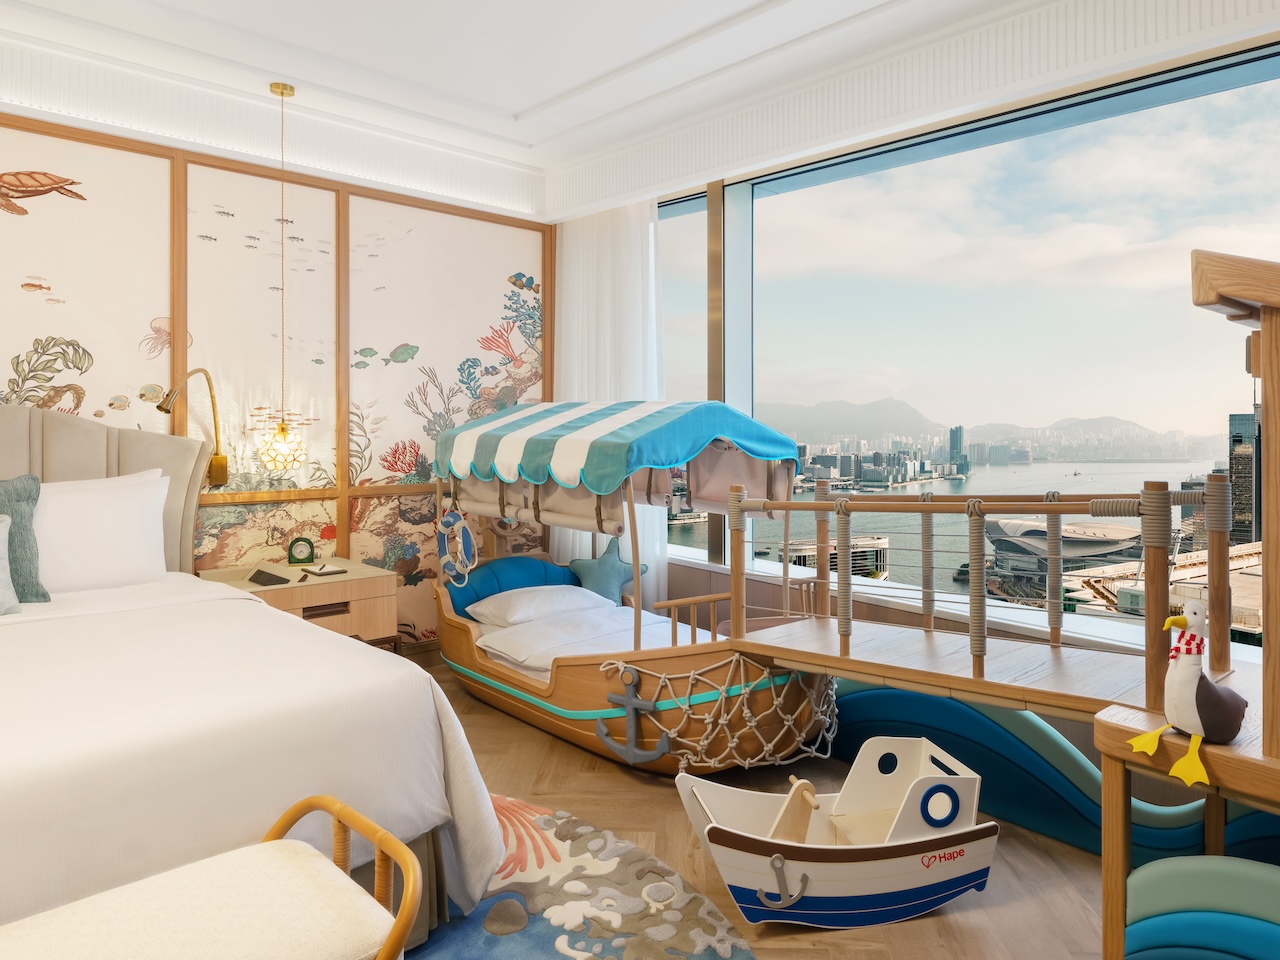 Five-star hotel Island Shangri-La has launched 21 new family rooms and suites and a series of exclusive family services in the heart of Hong Kong